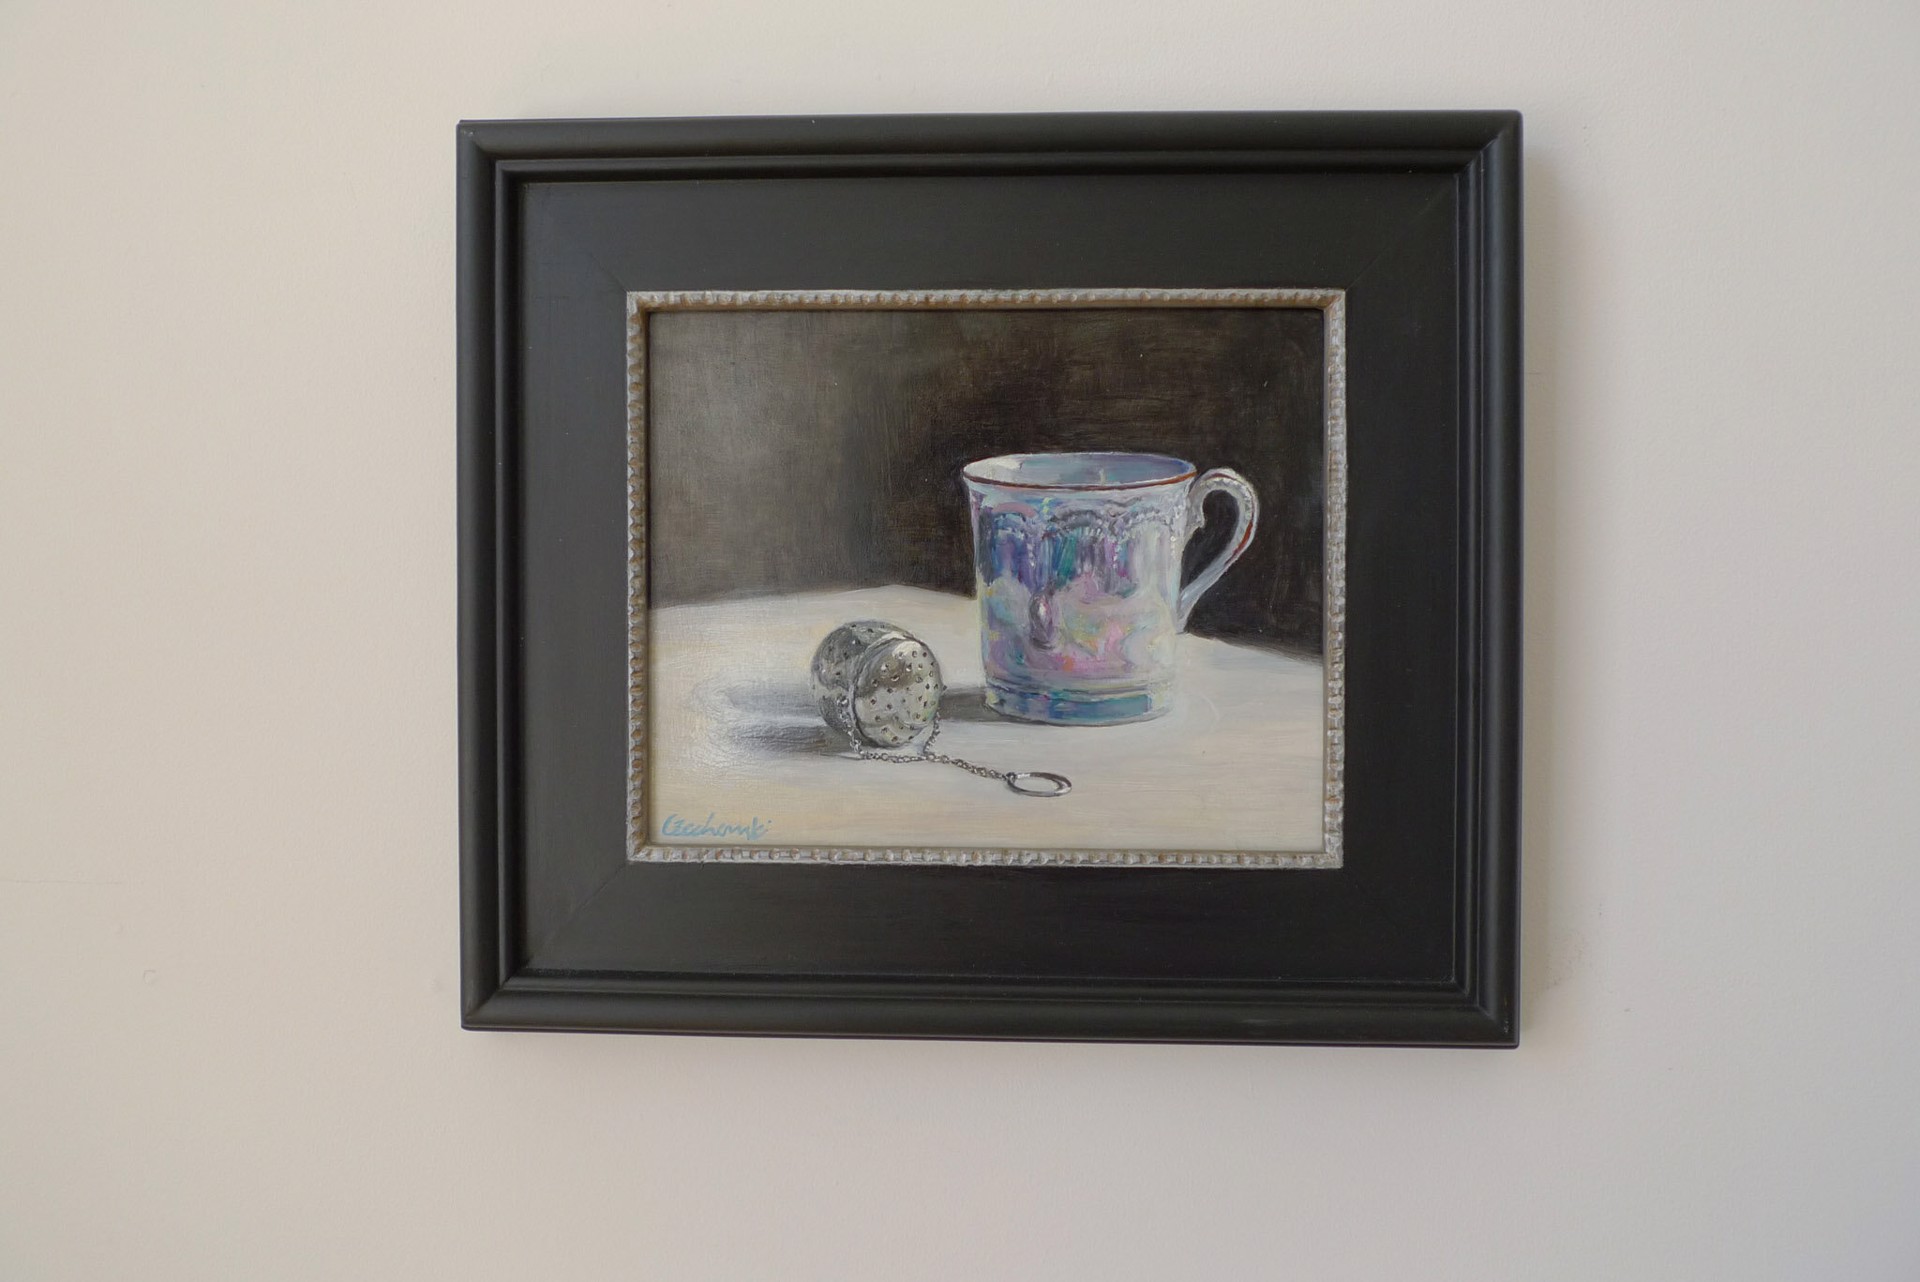 Silver Tea Ball with Lusterware Cup by Alicia Czechowski